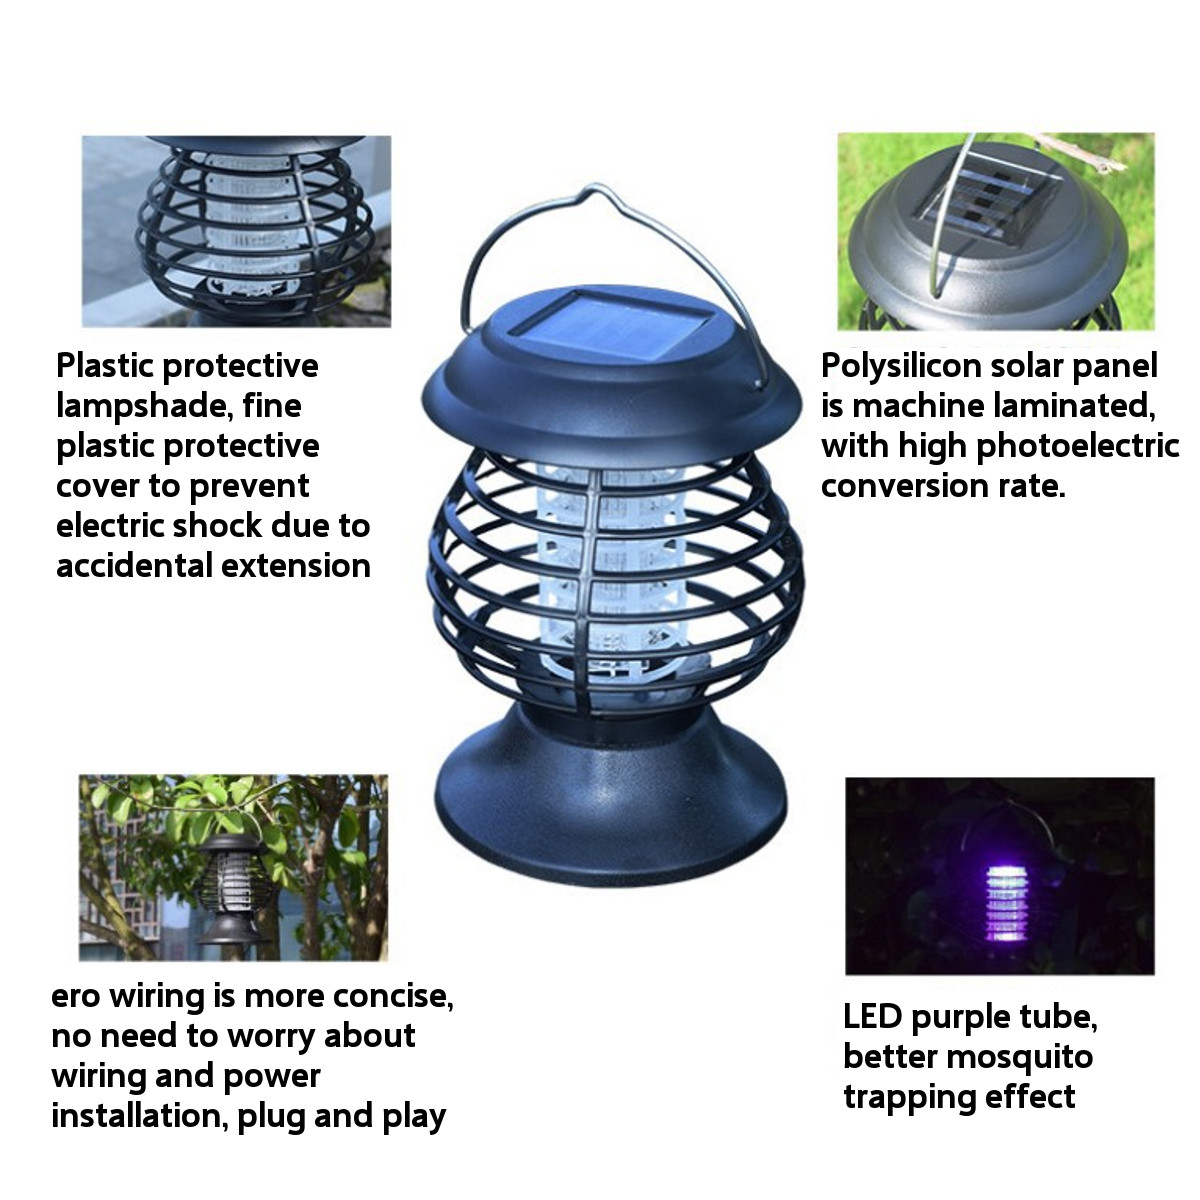 Electric-Fly-Zapper-Mosquito-Insect-Killer-UV-LED-Purple-Tube-Light-Trap-Pest-Solar-IP65-Working-8-H-1693978-3